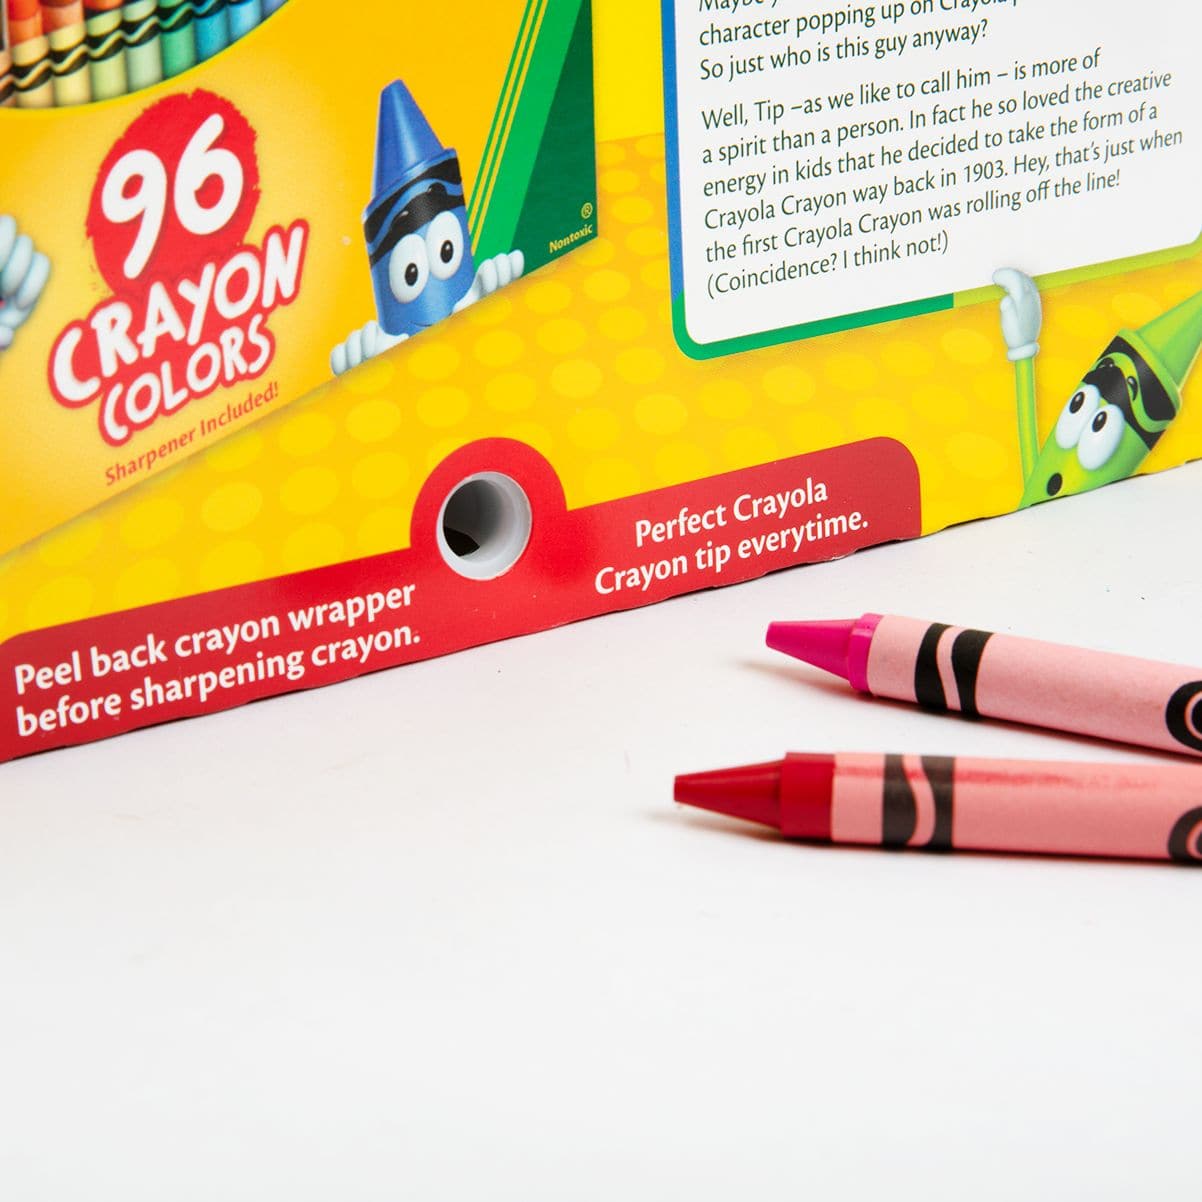 The Crayola Classic 96 Color Crayons in Flip-Top Pack with Sharpener -  Limit 1 135 Variety offers a wide range of Products